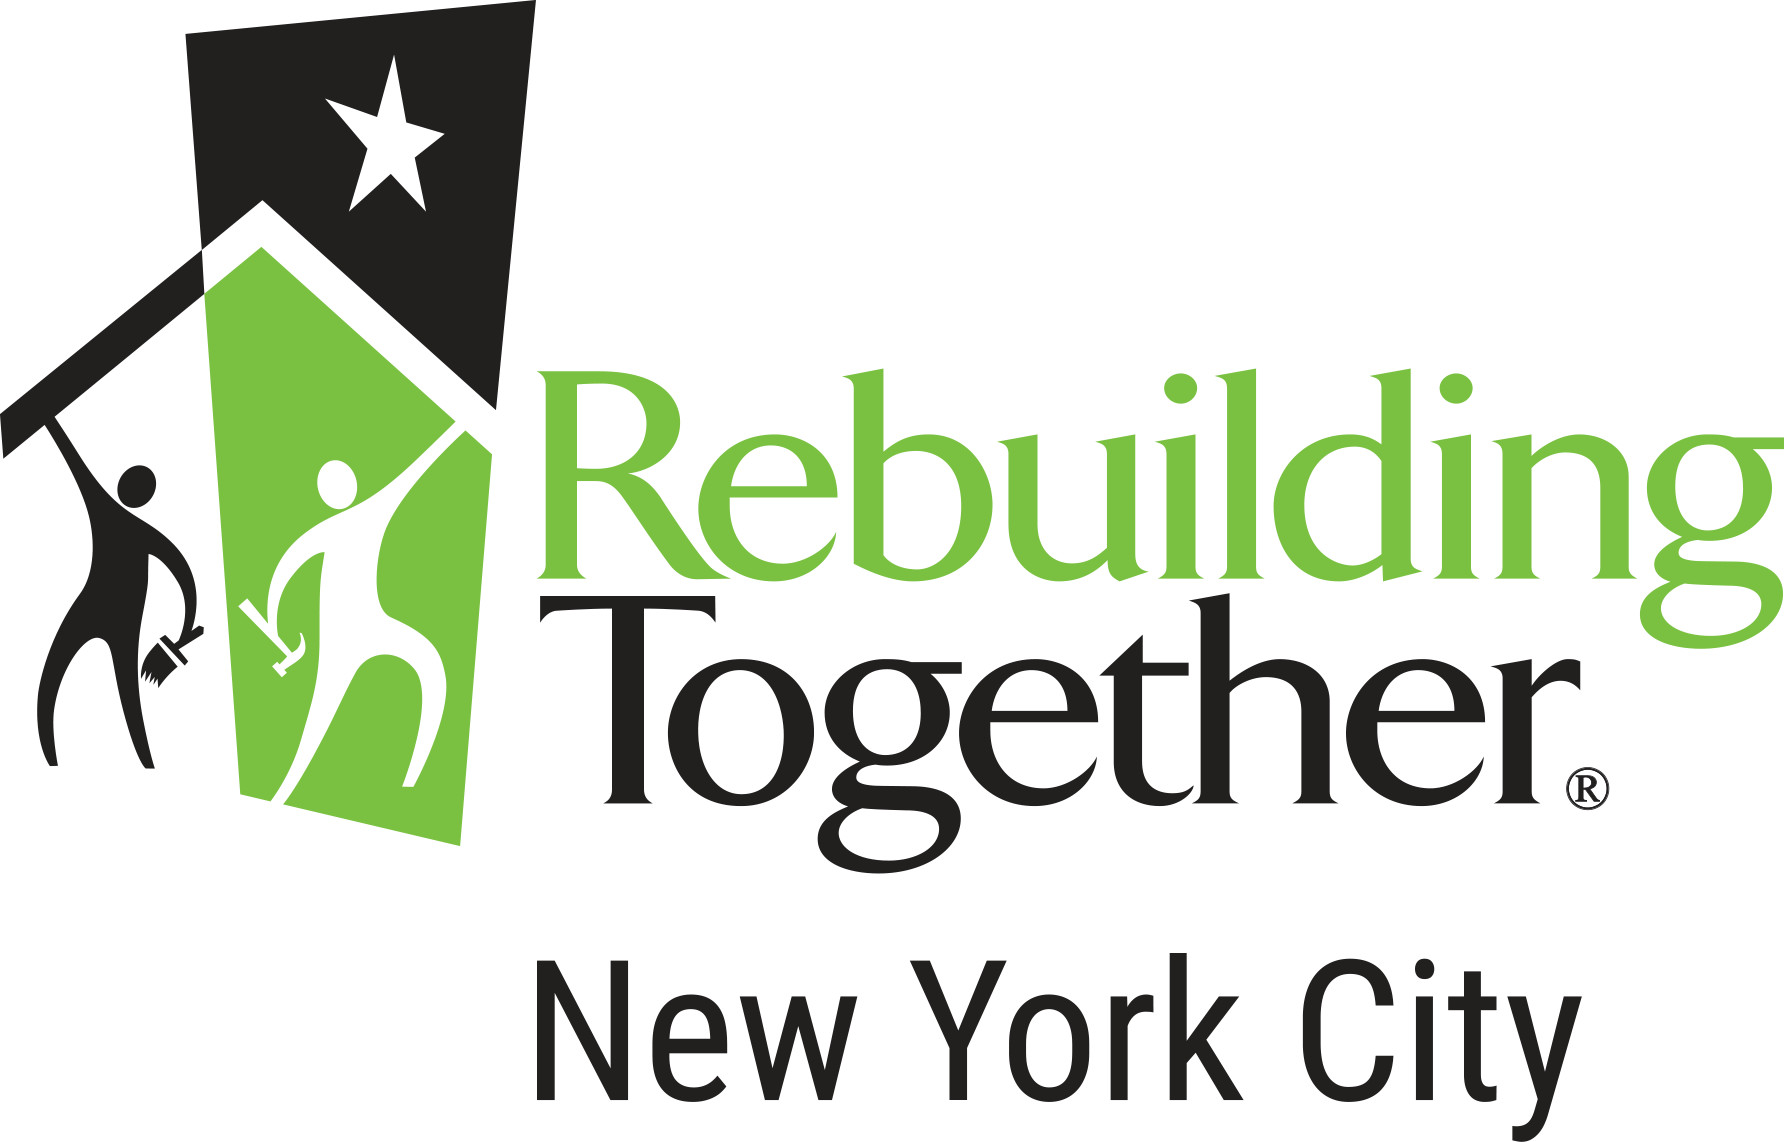 This image is Rebuilding Together NYC's logo